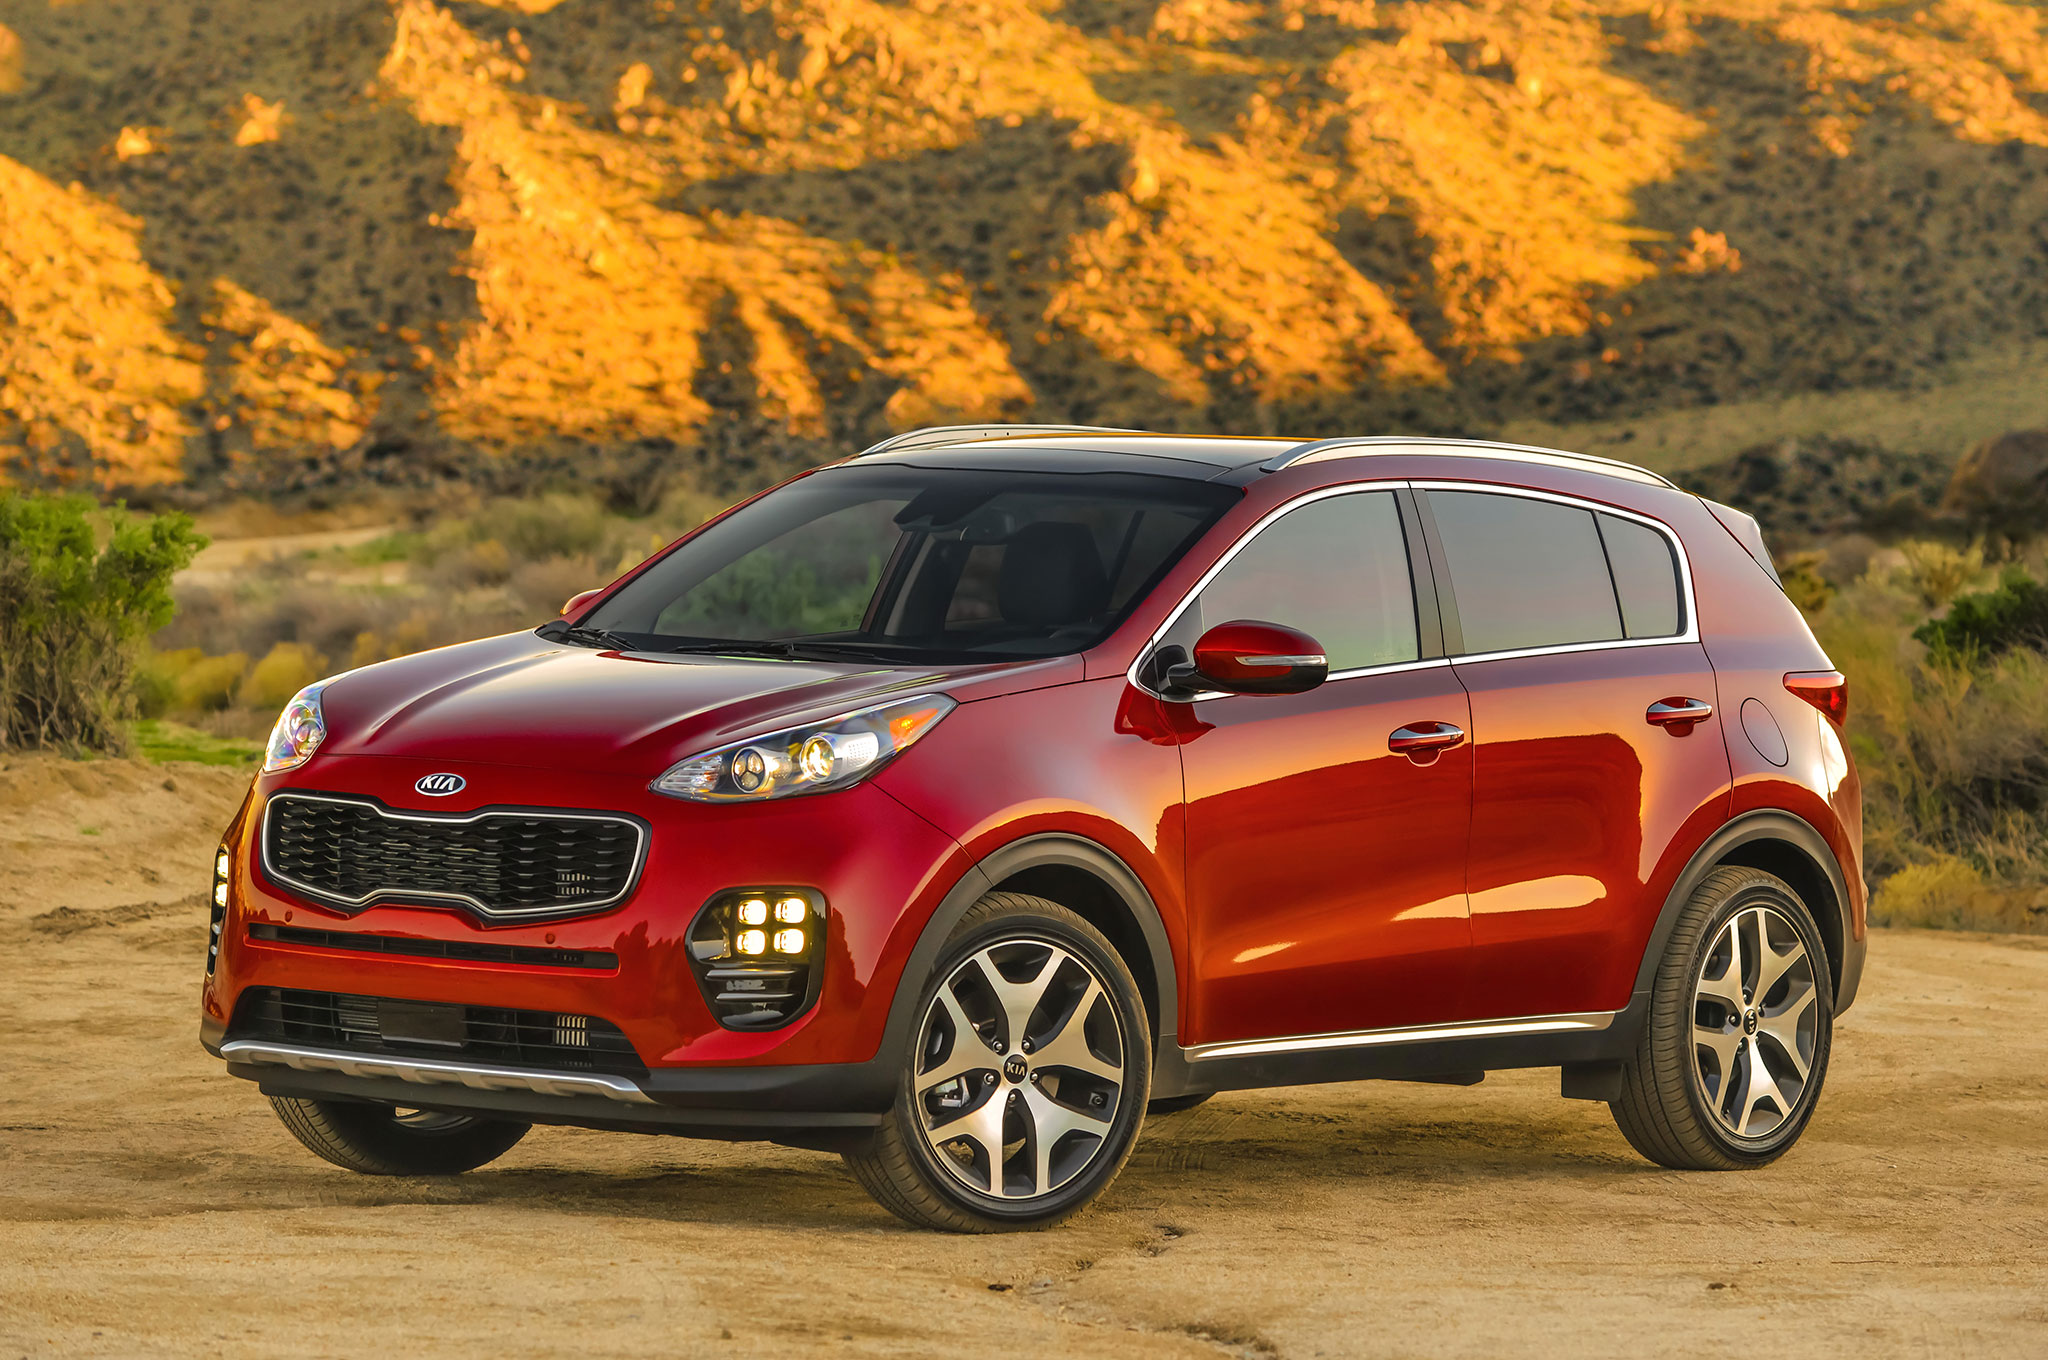 2018 Kia Sportage SX Turbo Test Drive and Review, Specifications, Pricing